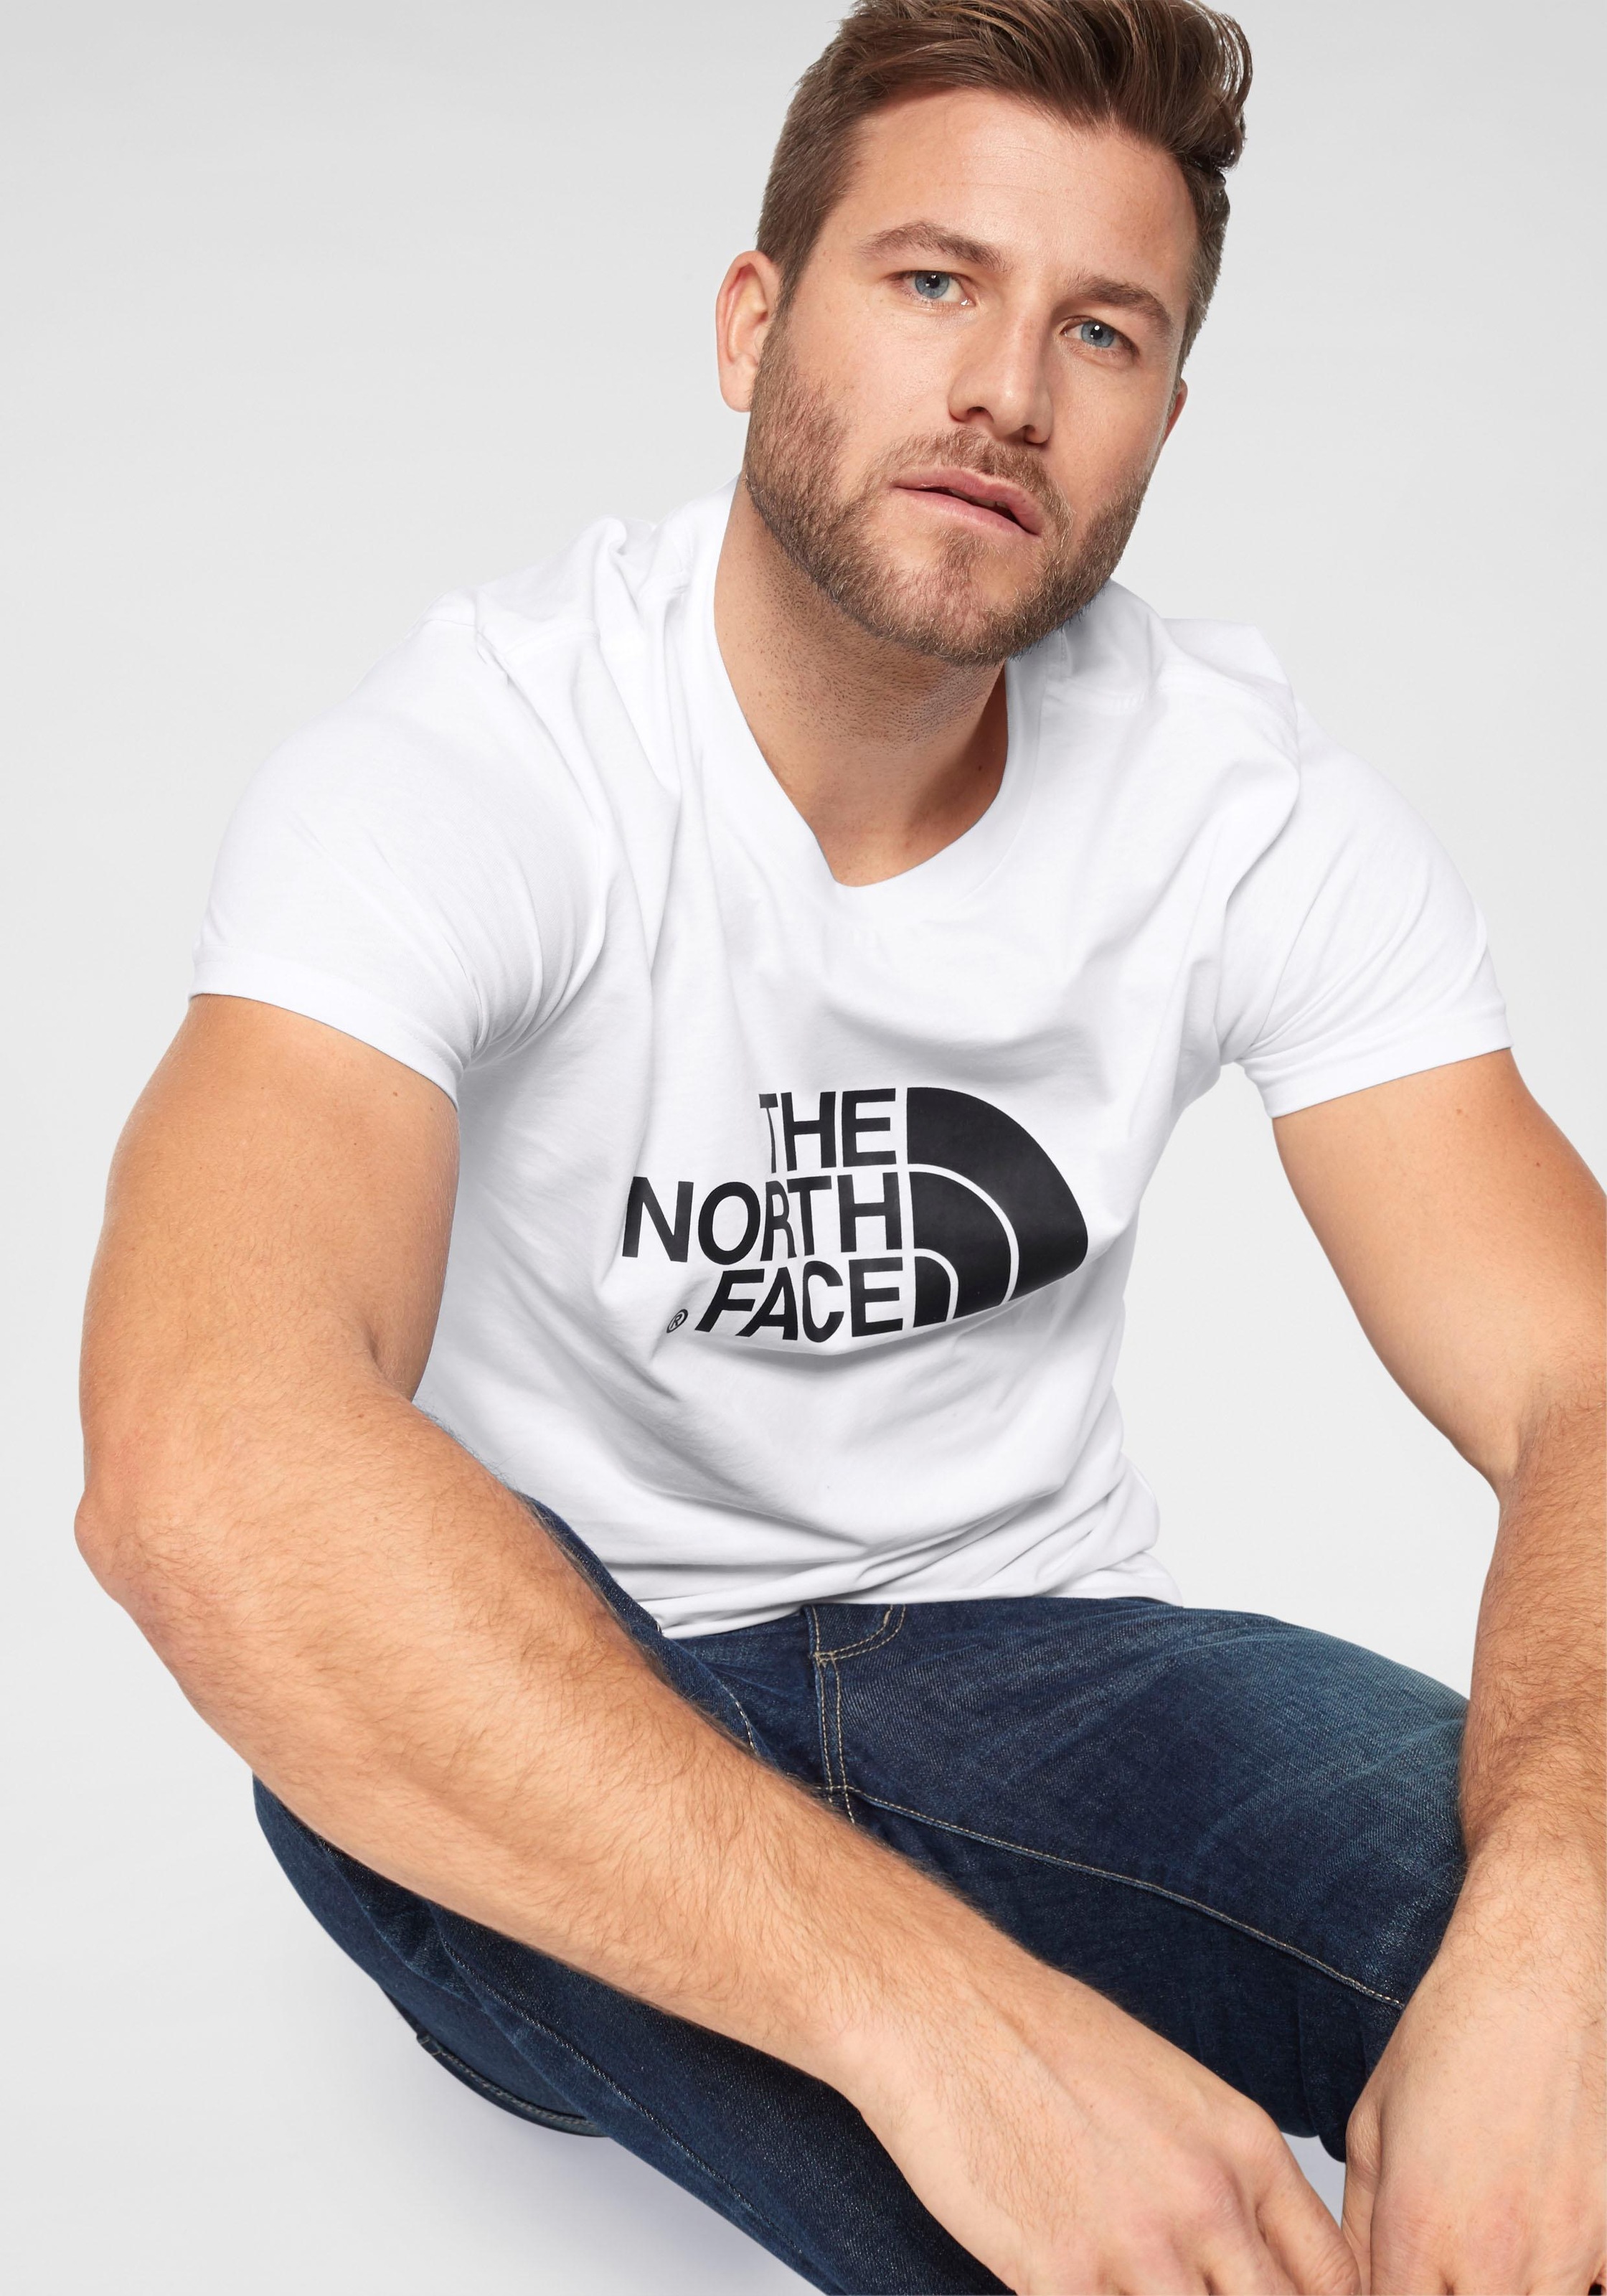 The North Face T-Shirt kaufen »EASY online Großer bei TEE«, OTTO Logo-Print